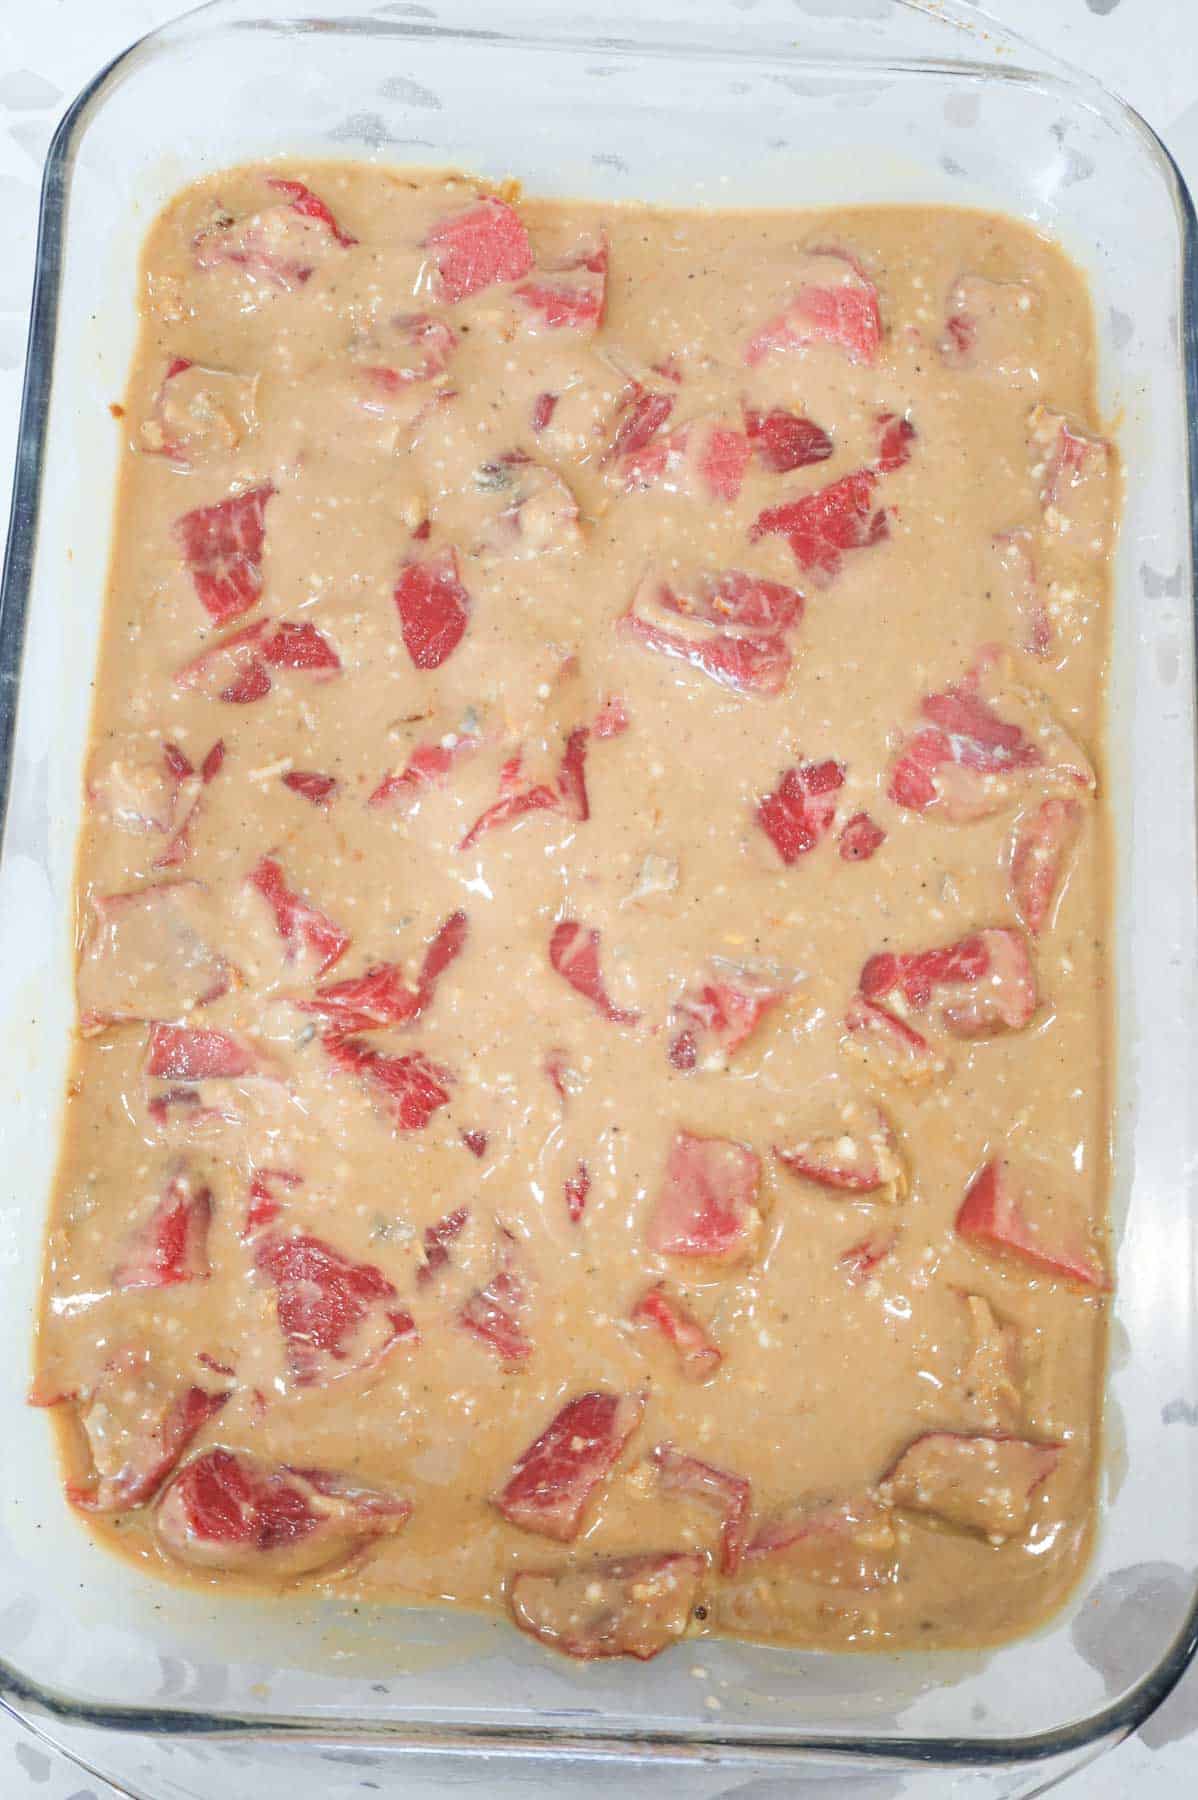 cream of mushroom soup and gravy soup mixture in a baking dish with beef cubes